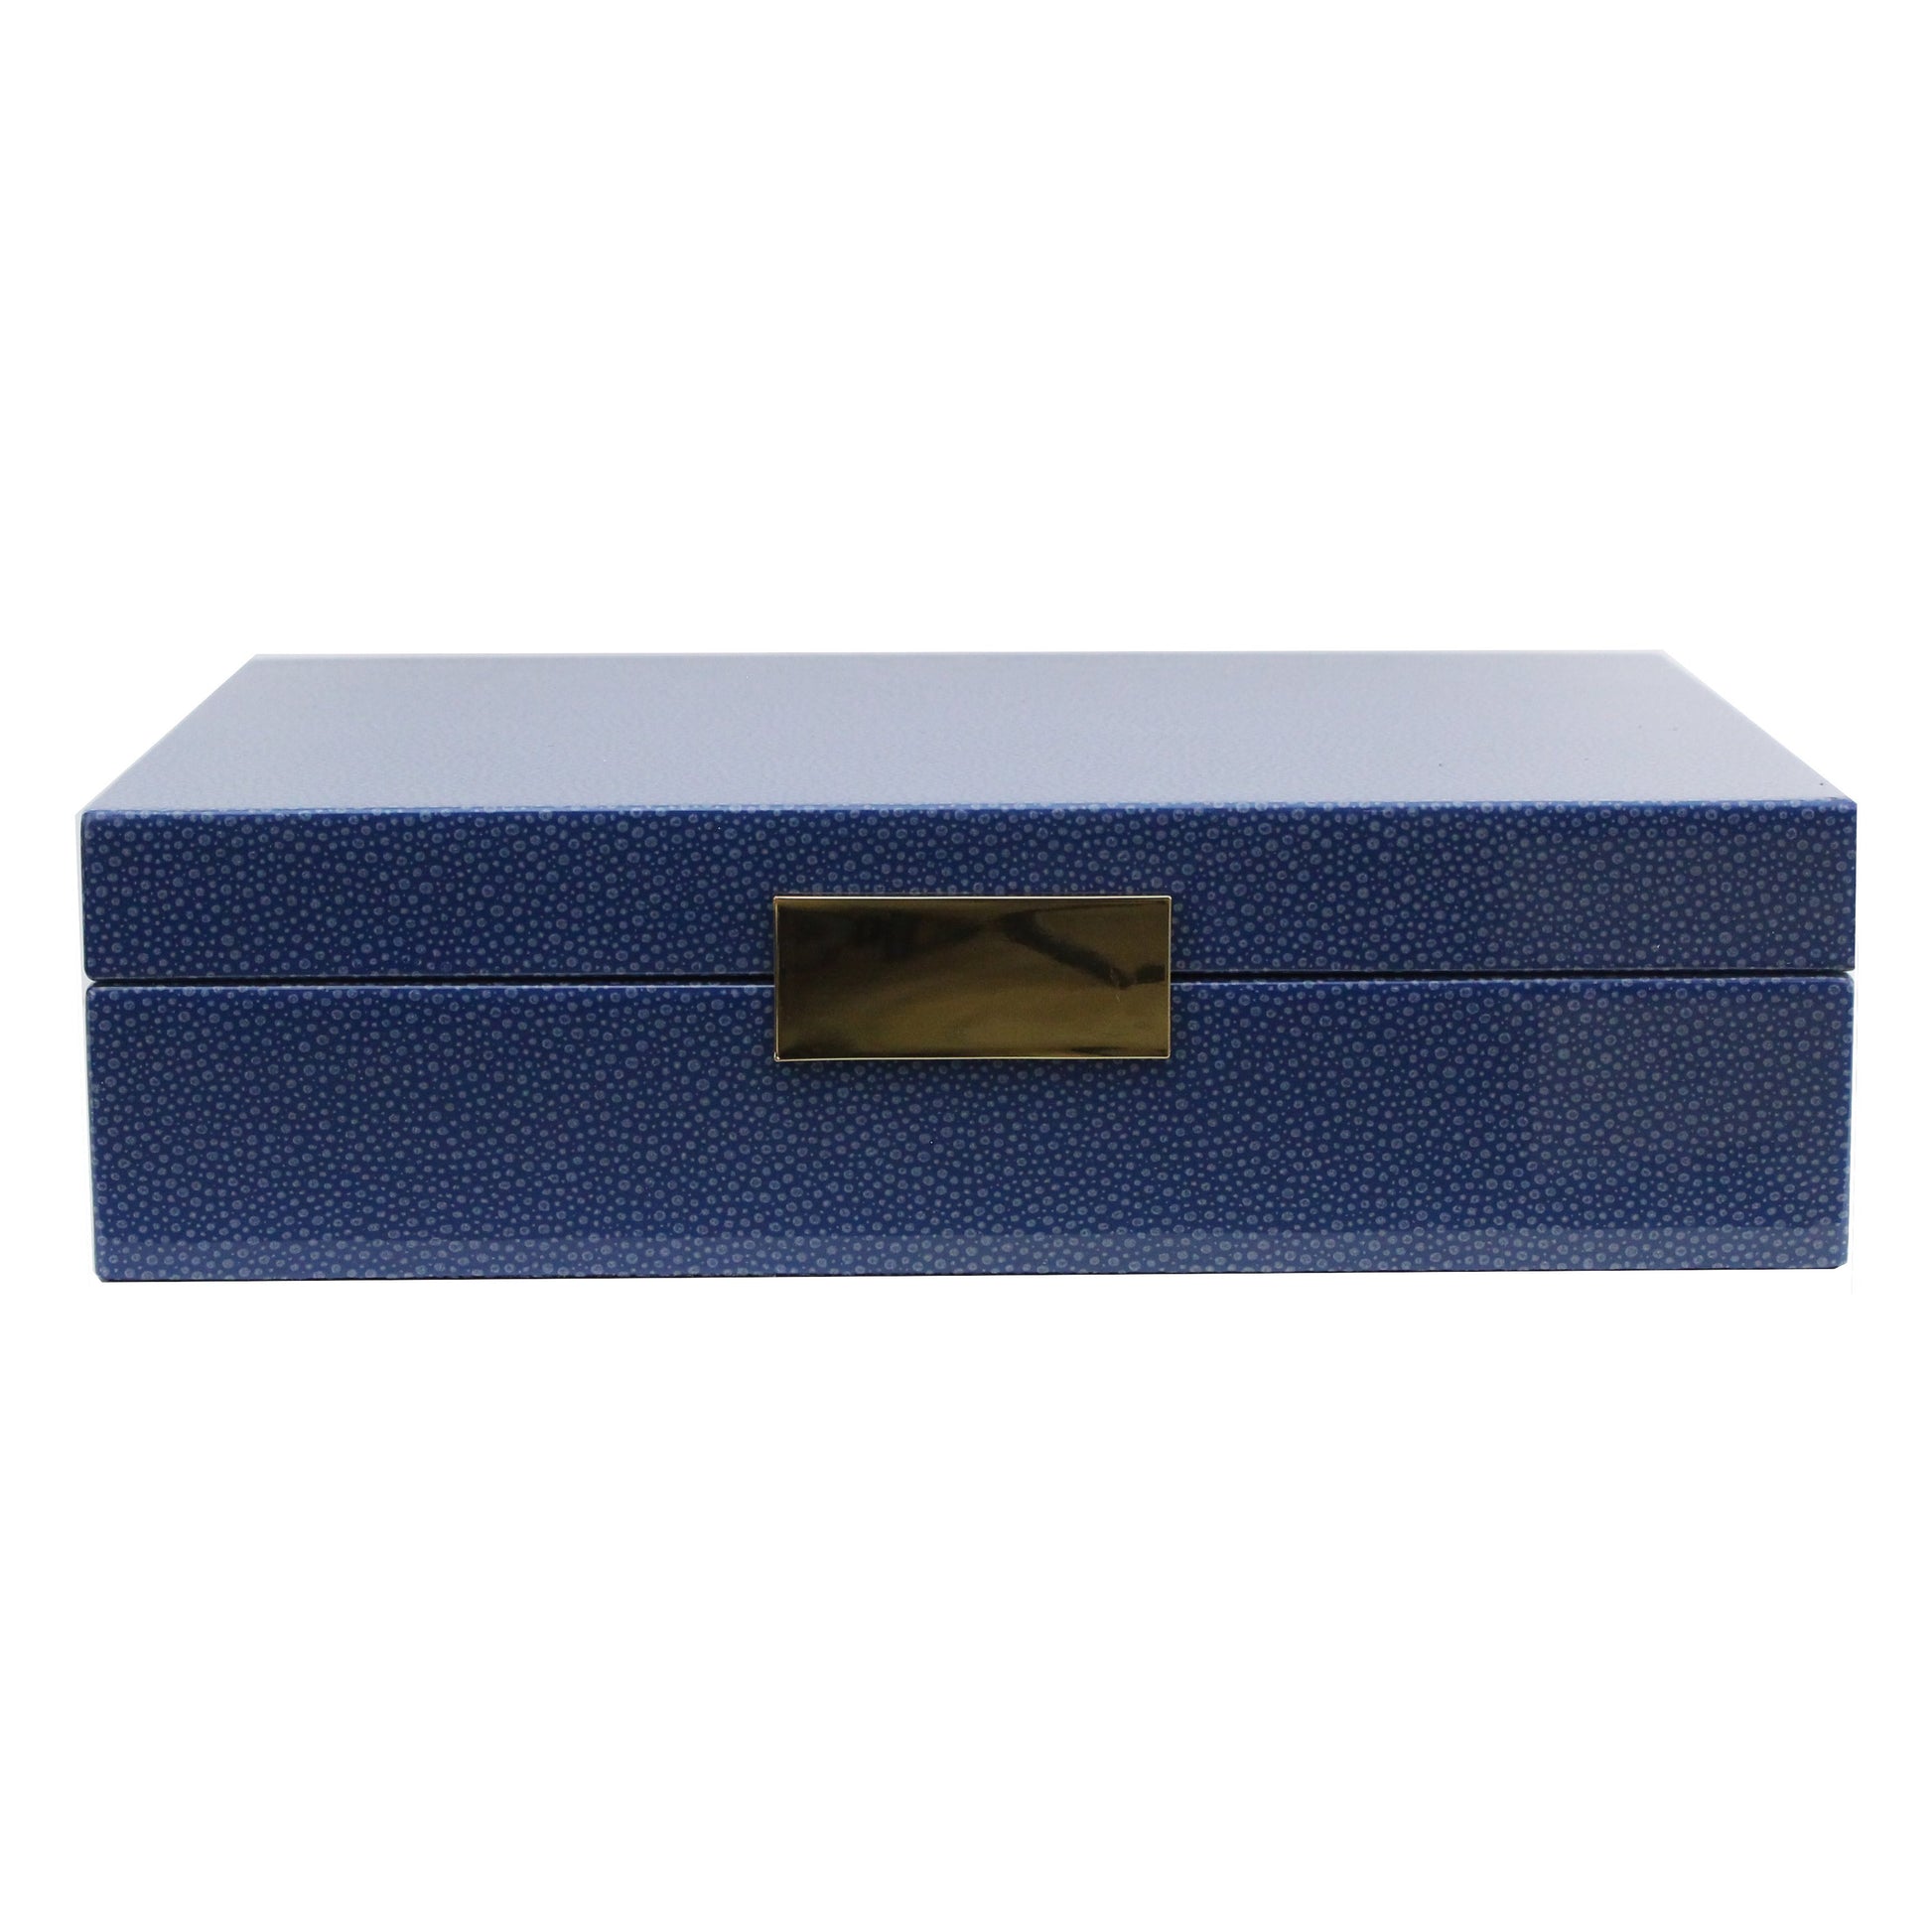 Large Blue Shagreen Lacquer Box with Silver - Addison Ross Ltd UK